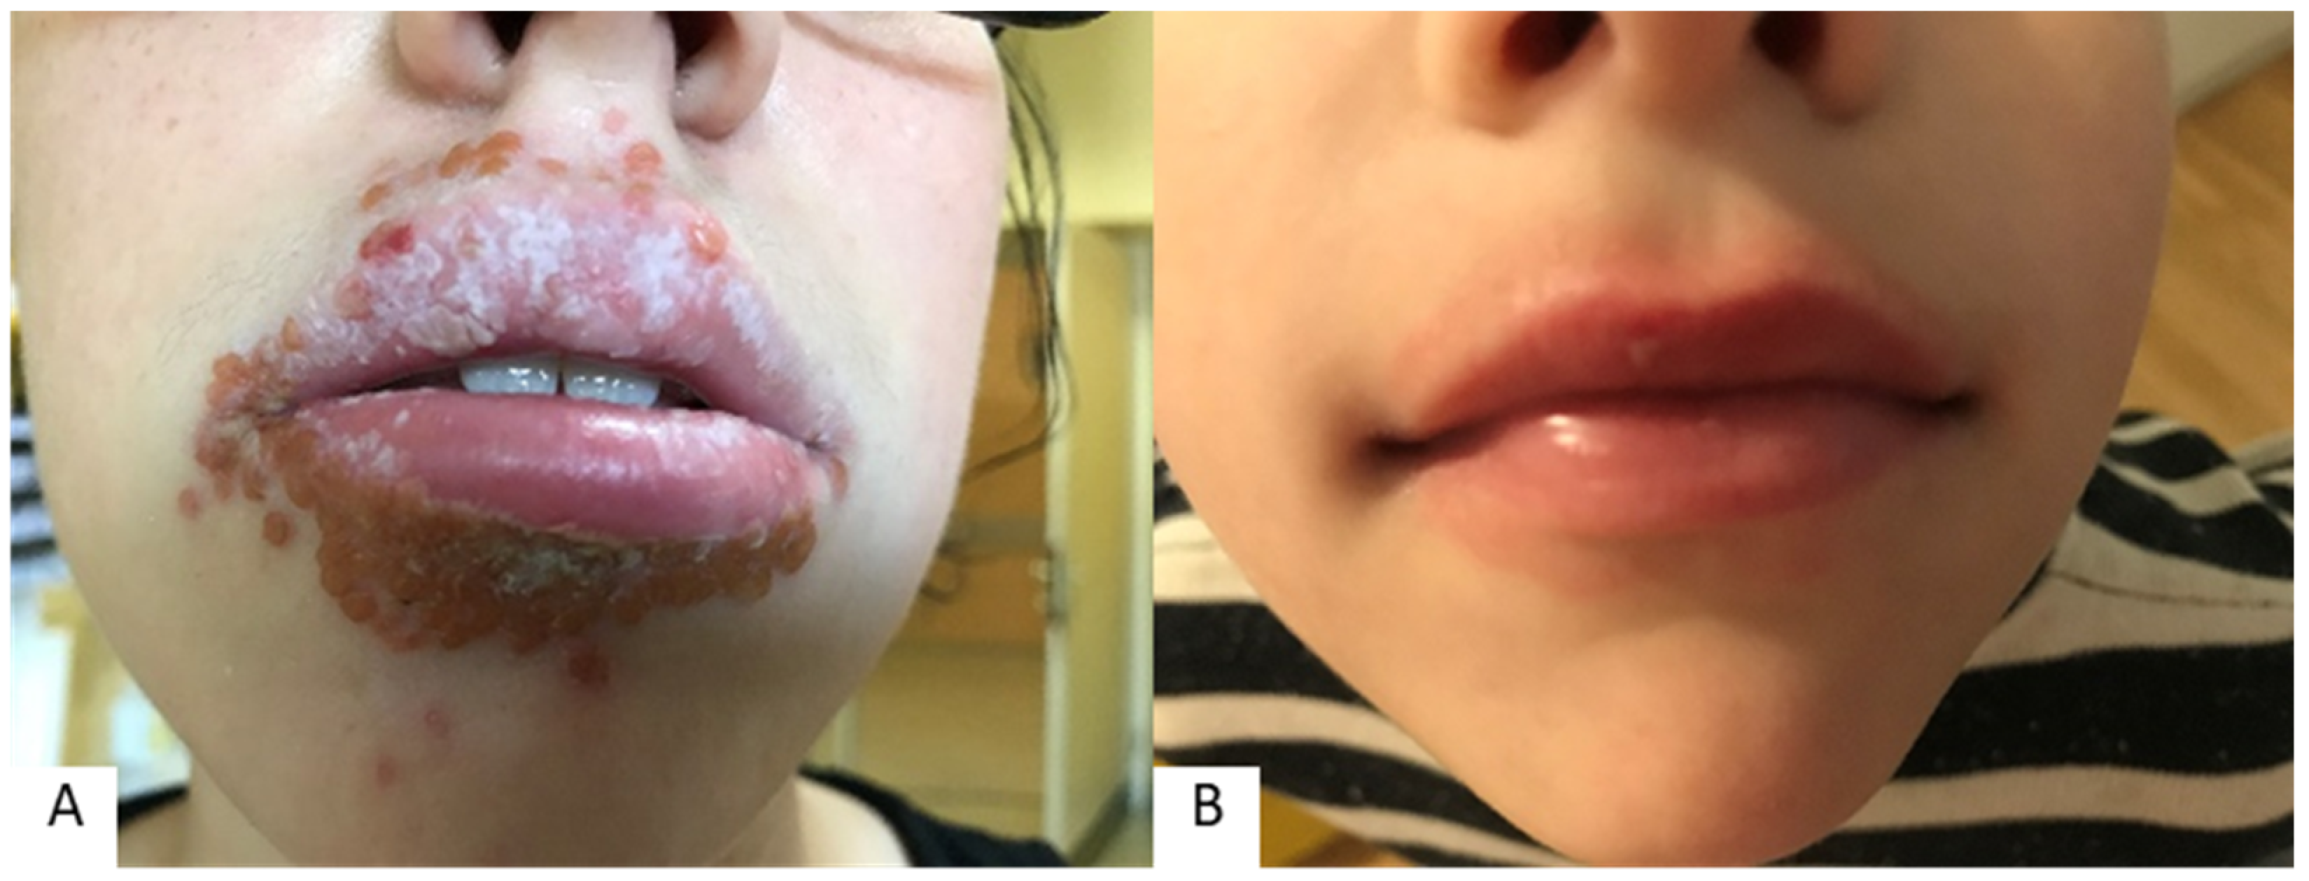 Cosmetics | Free Full-Text | Factors Participating in the Occurrence of  Inflammation of the Lips (Cheilitis) and Perioral Skin